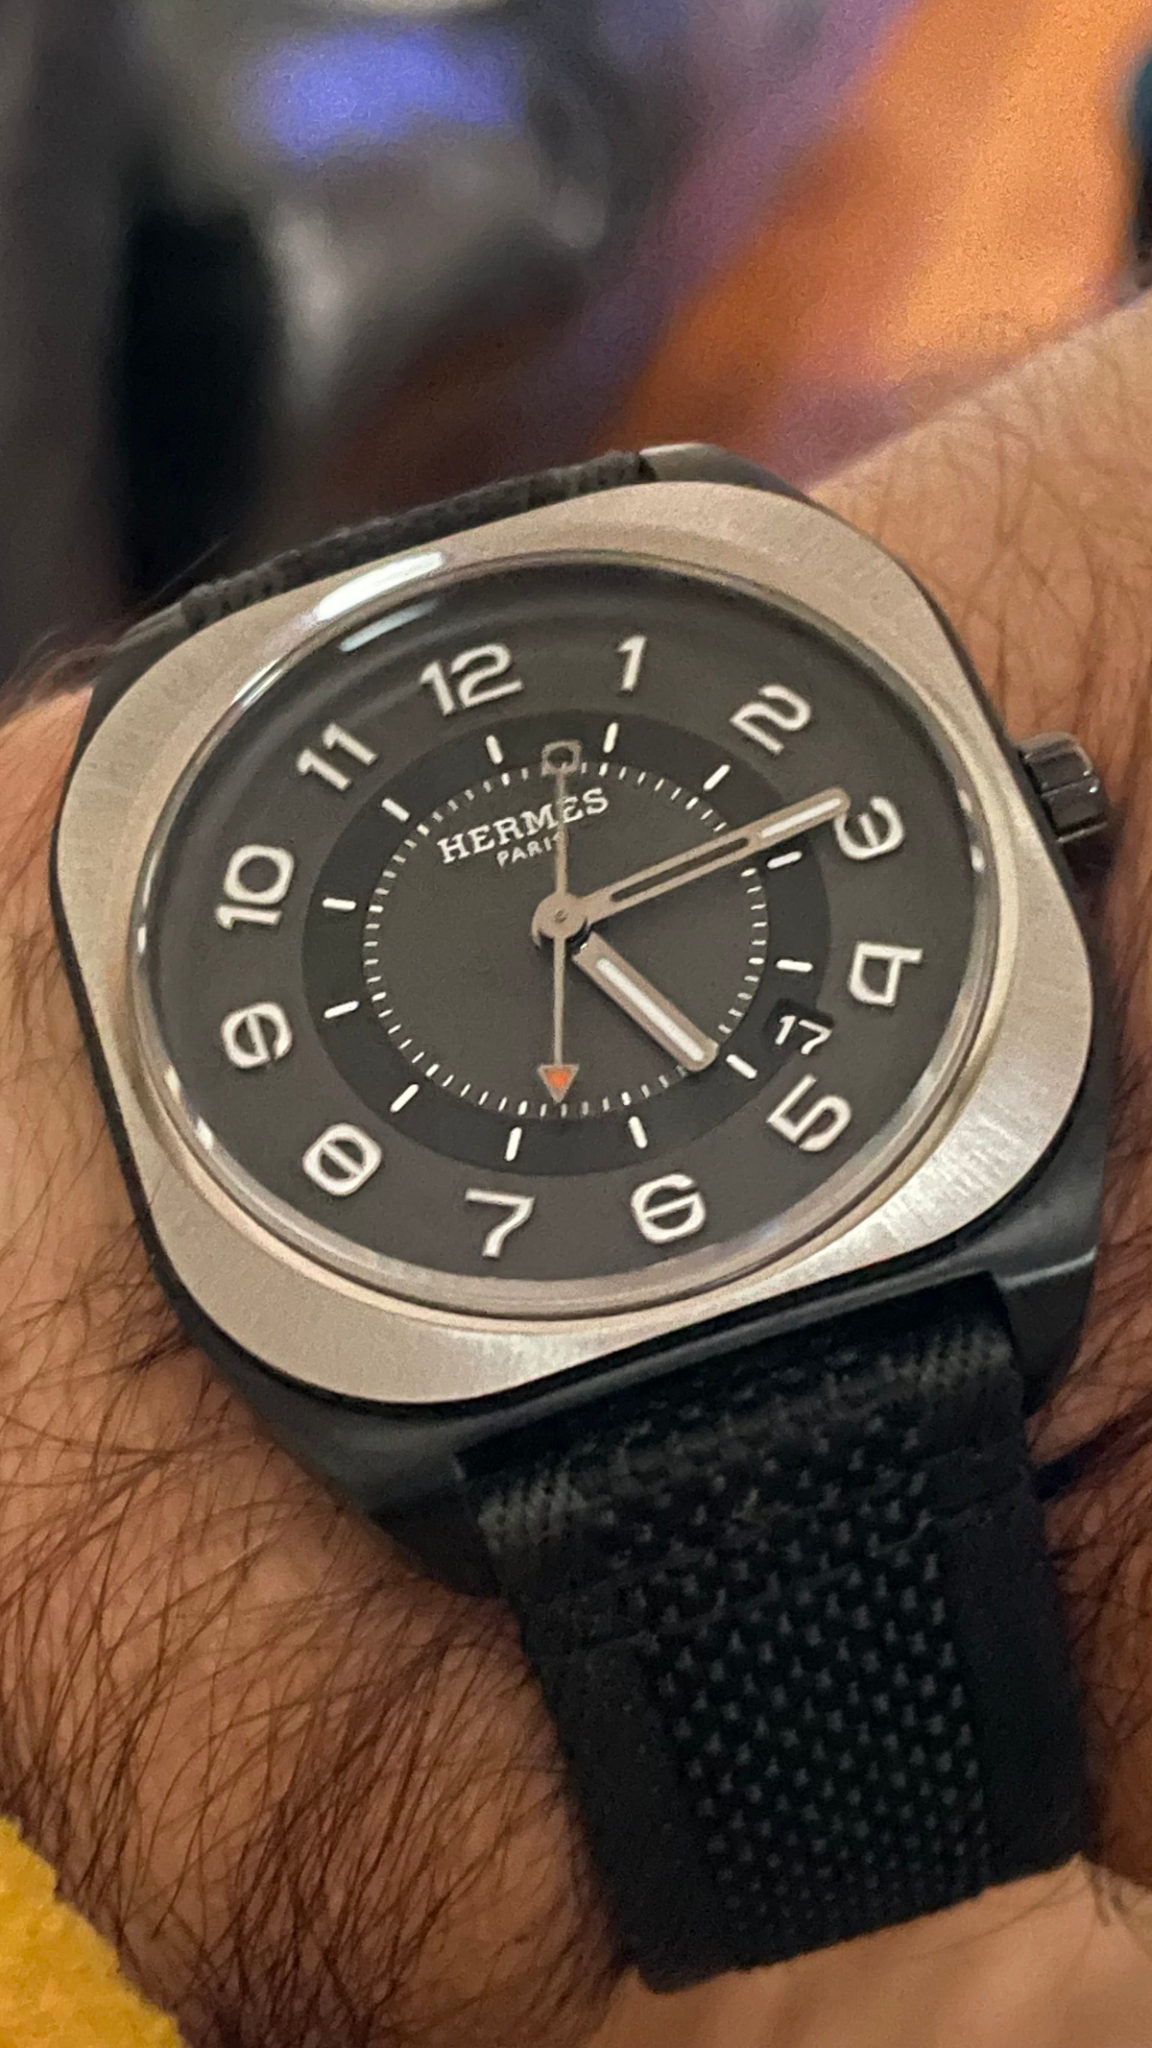 Hermes H08 Watch Rose Gold review